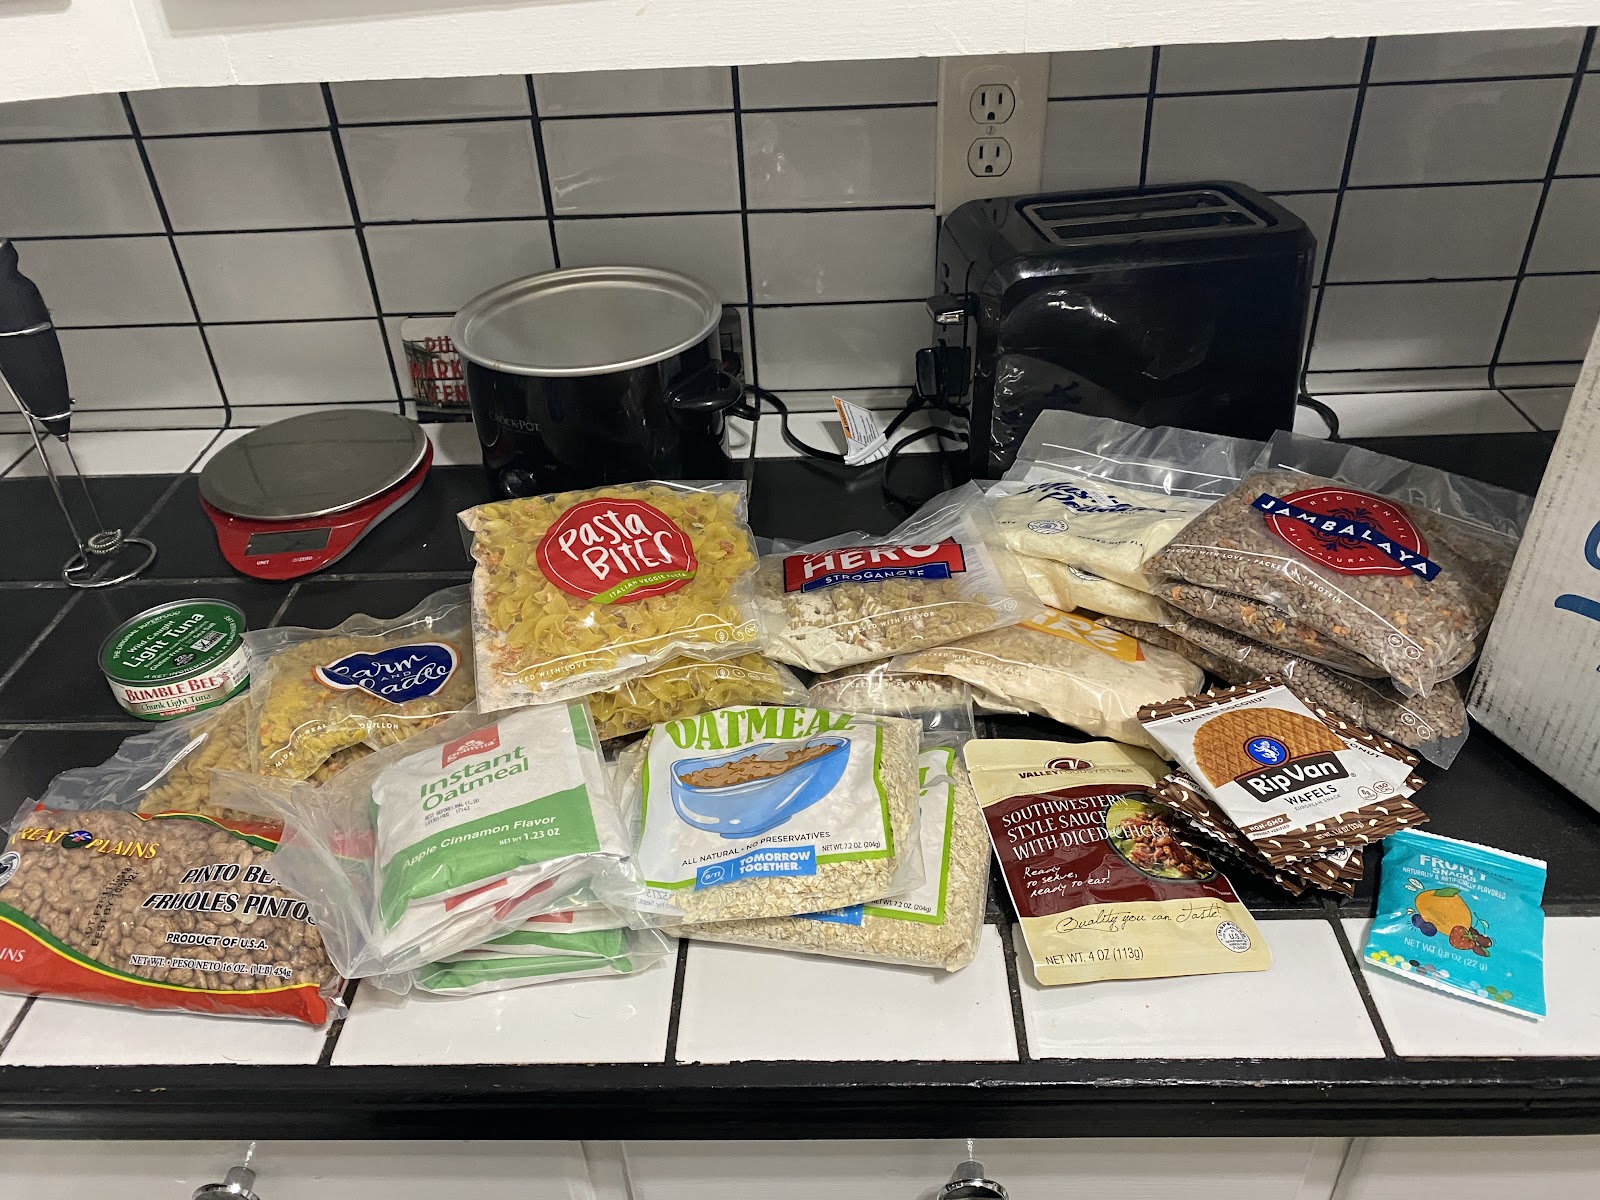 Full Cart - The Best Value in Meal Kit Delivery